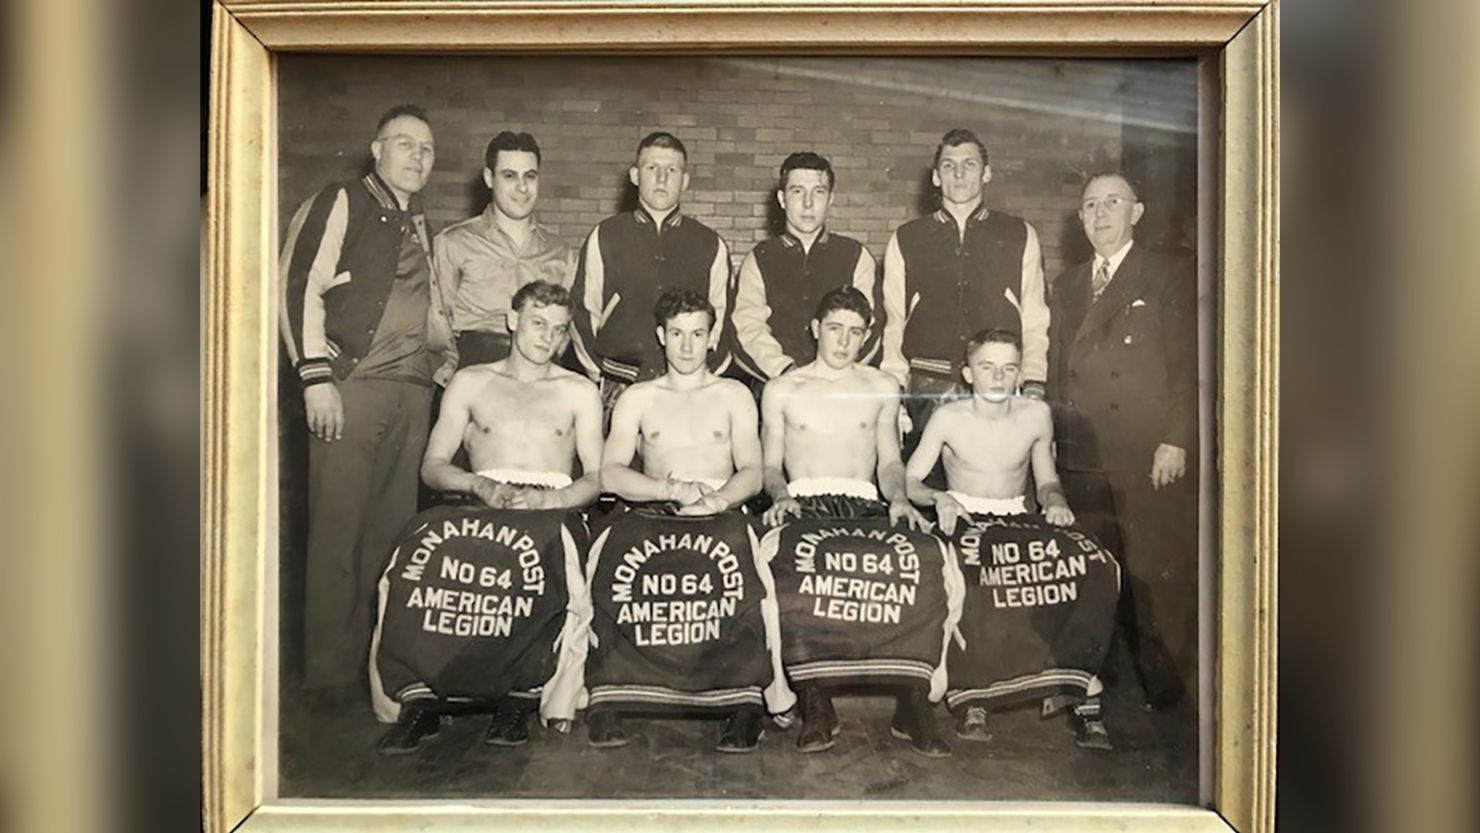 This photo, originally published in the Monahan Post News in 1947, shows Mil Bardsley, bottom right, with his American Legion boxing team. The photo is part of his son's, author Greg Bardsley, personal archive.